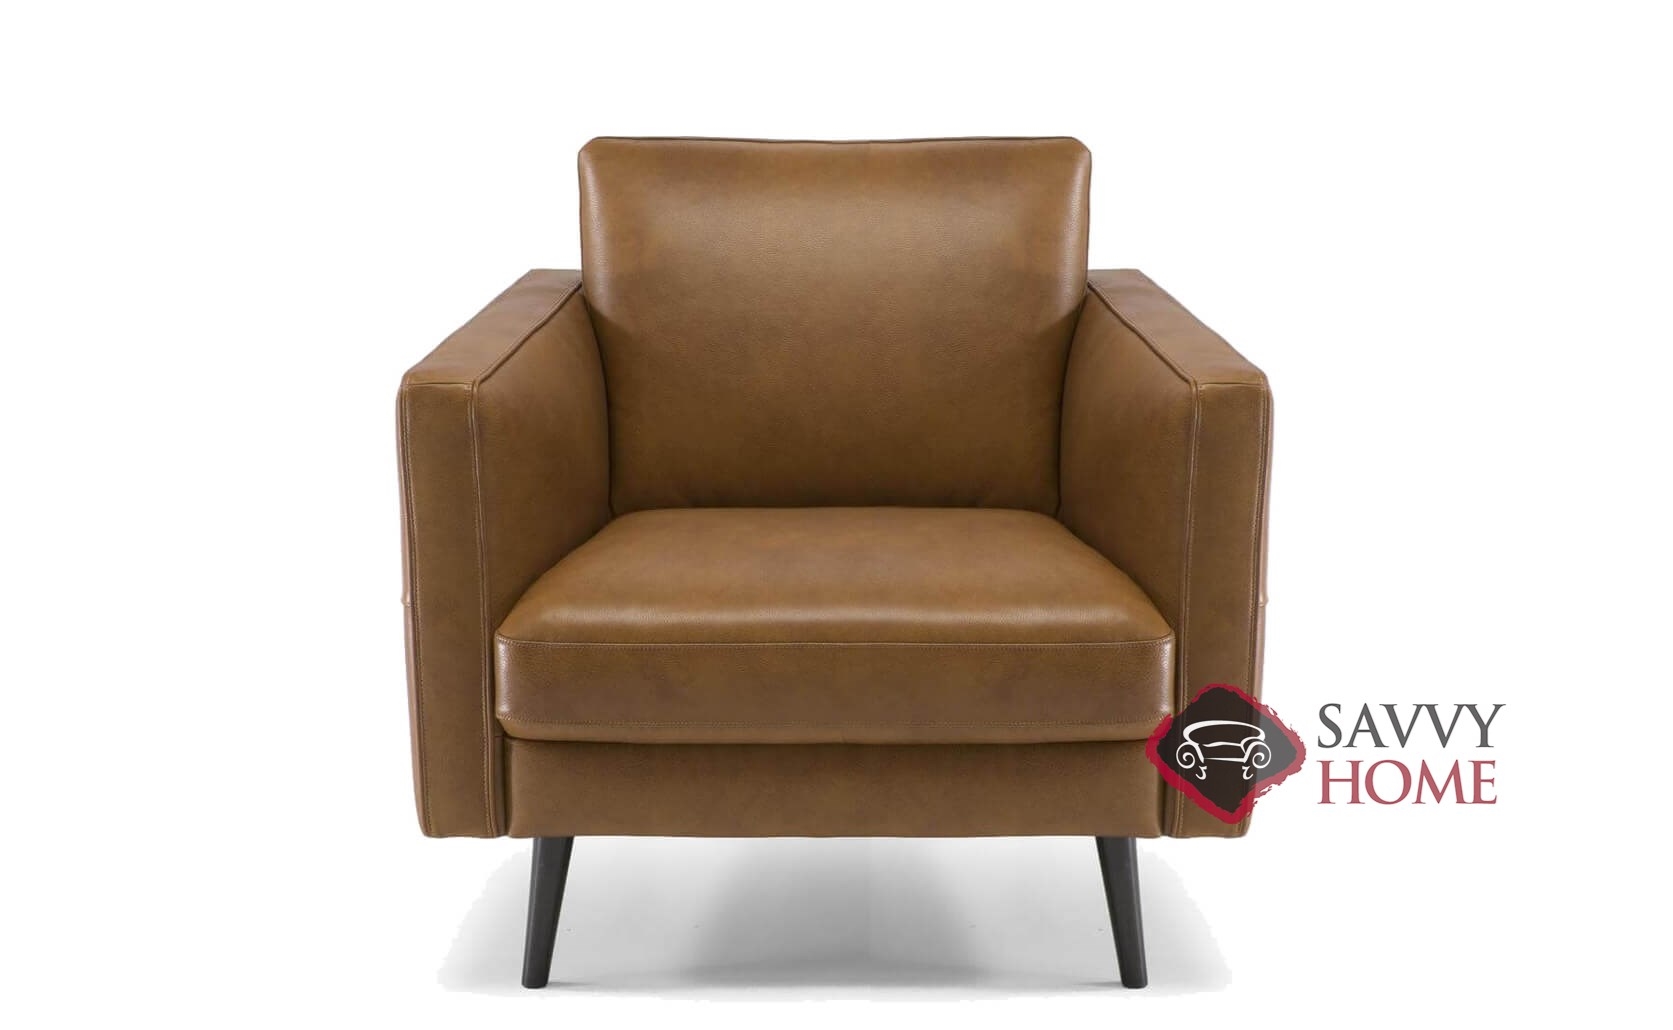 Destrezza C092 Leather Stationary Chair By Natuzzi Is Fully Customizable By You Savvyhomestore Com